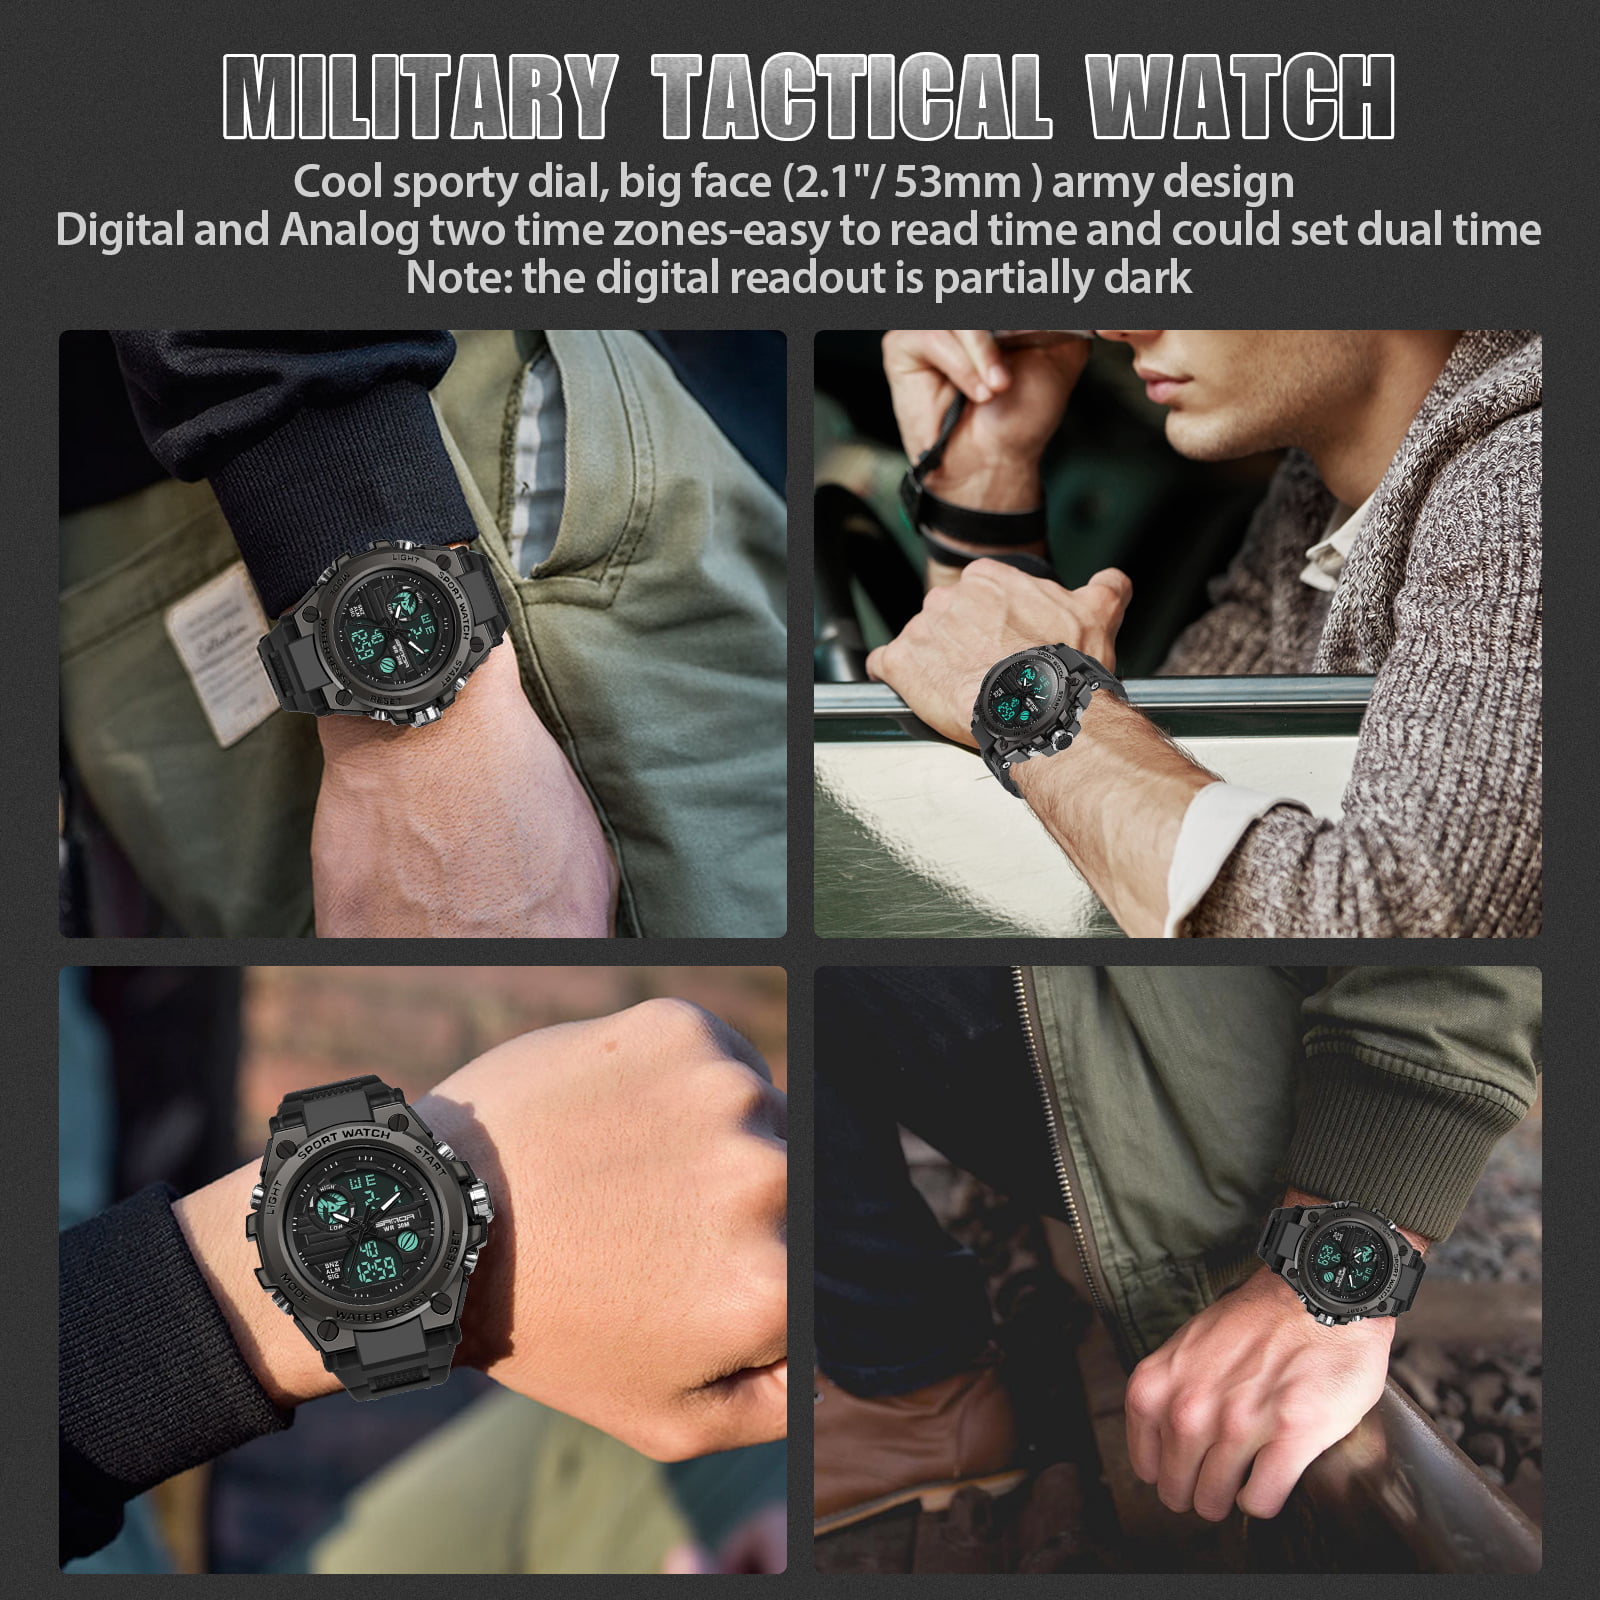 Men's Military Tactical Watch, EEEkit Digital Sports Outdoor Watch for Men, Waterproof Analog Wristwatch, Large Face Alarm Dual Time Army Watches with LED Stopwatch Calendar Day Date - image 2 of 9